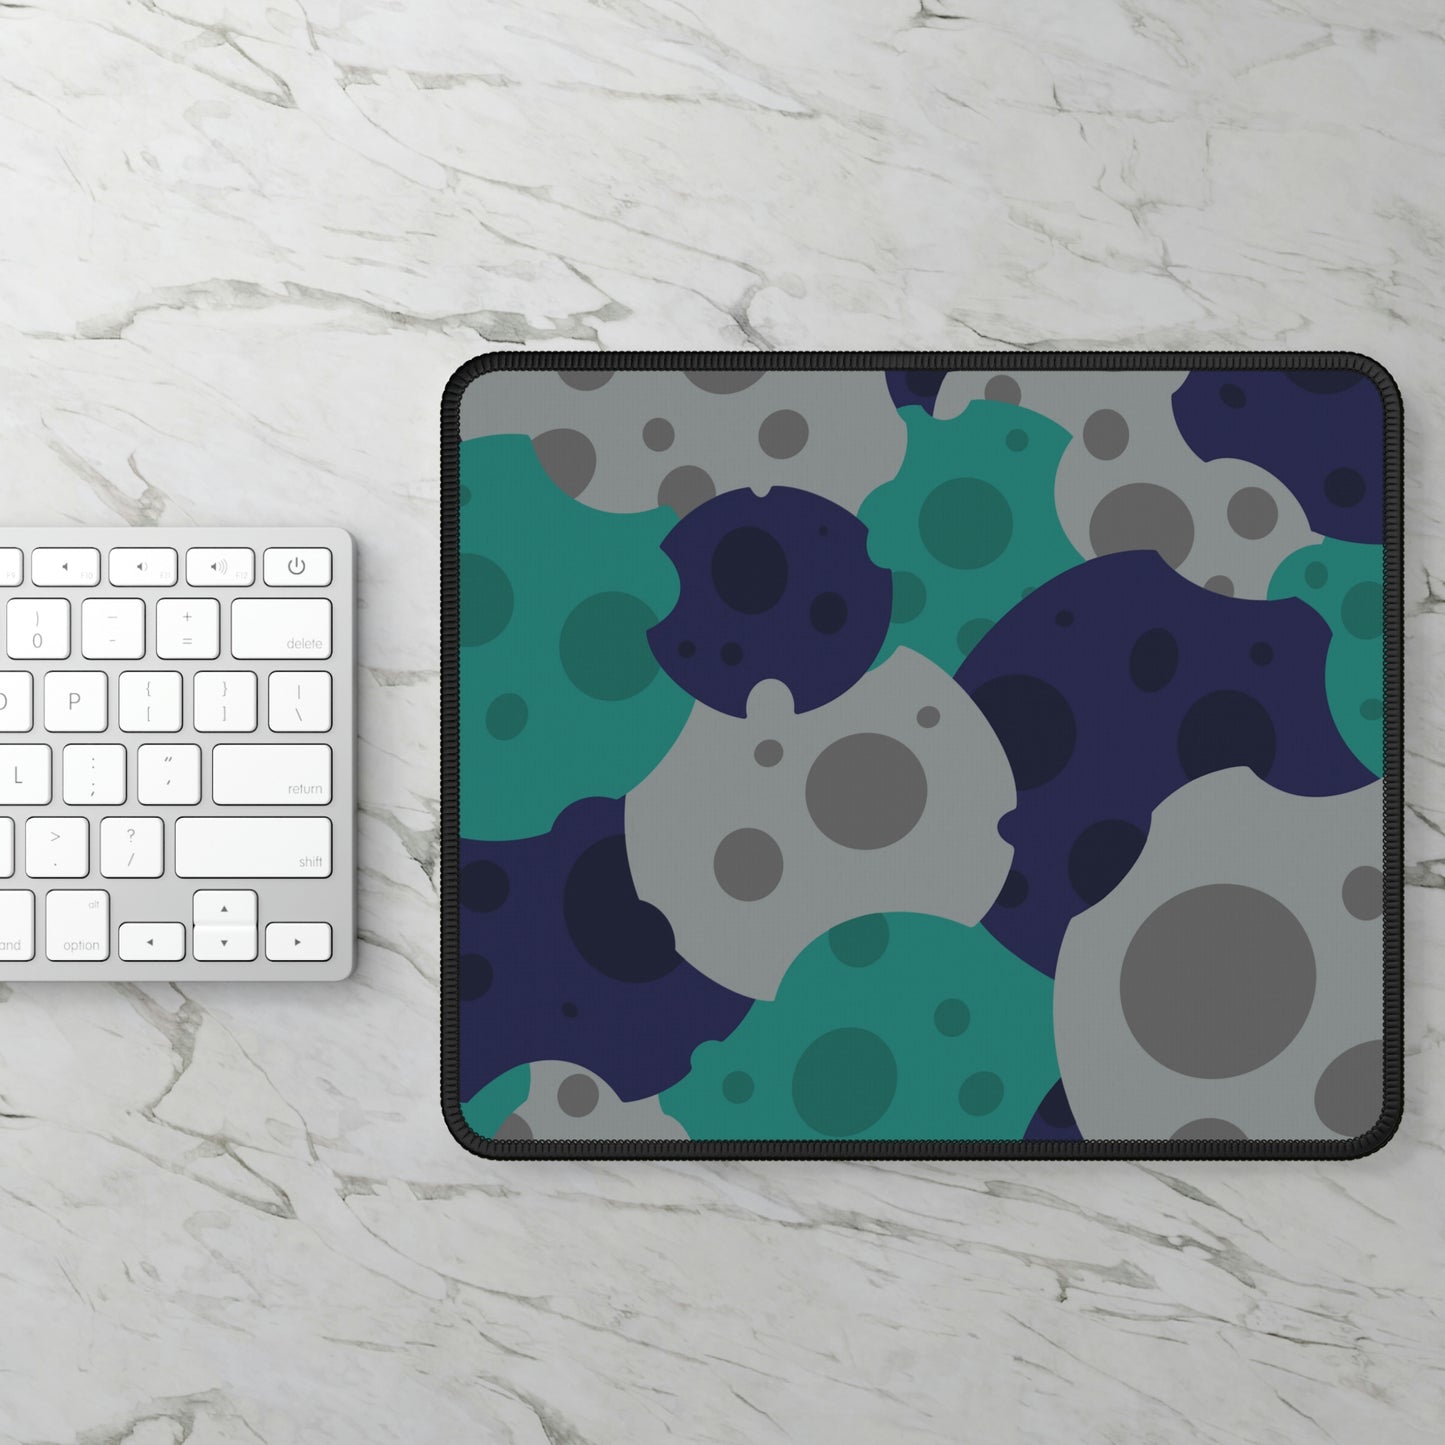 A gaming mouse pad with gray, teal, and dark blue meteorites sitting next to a keyboard.